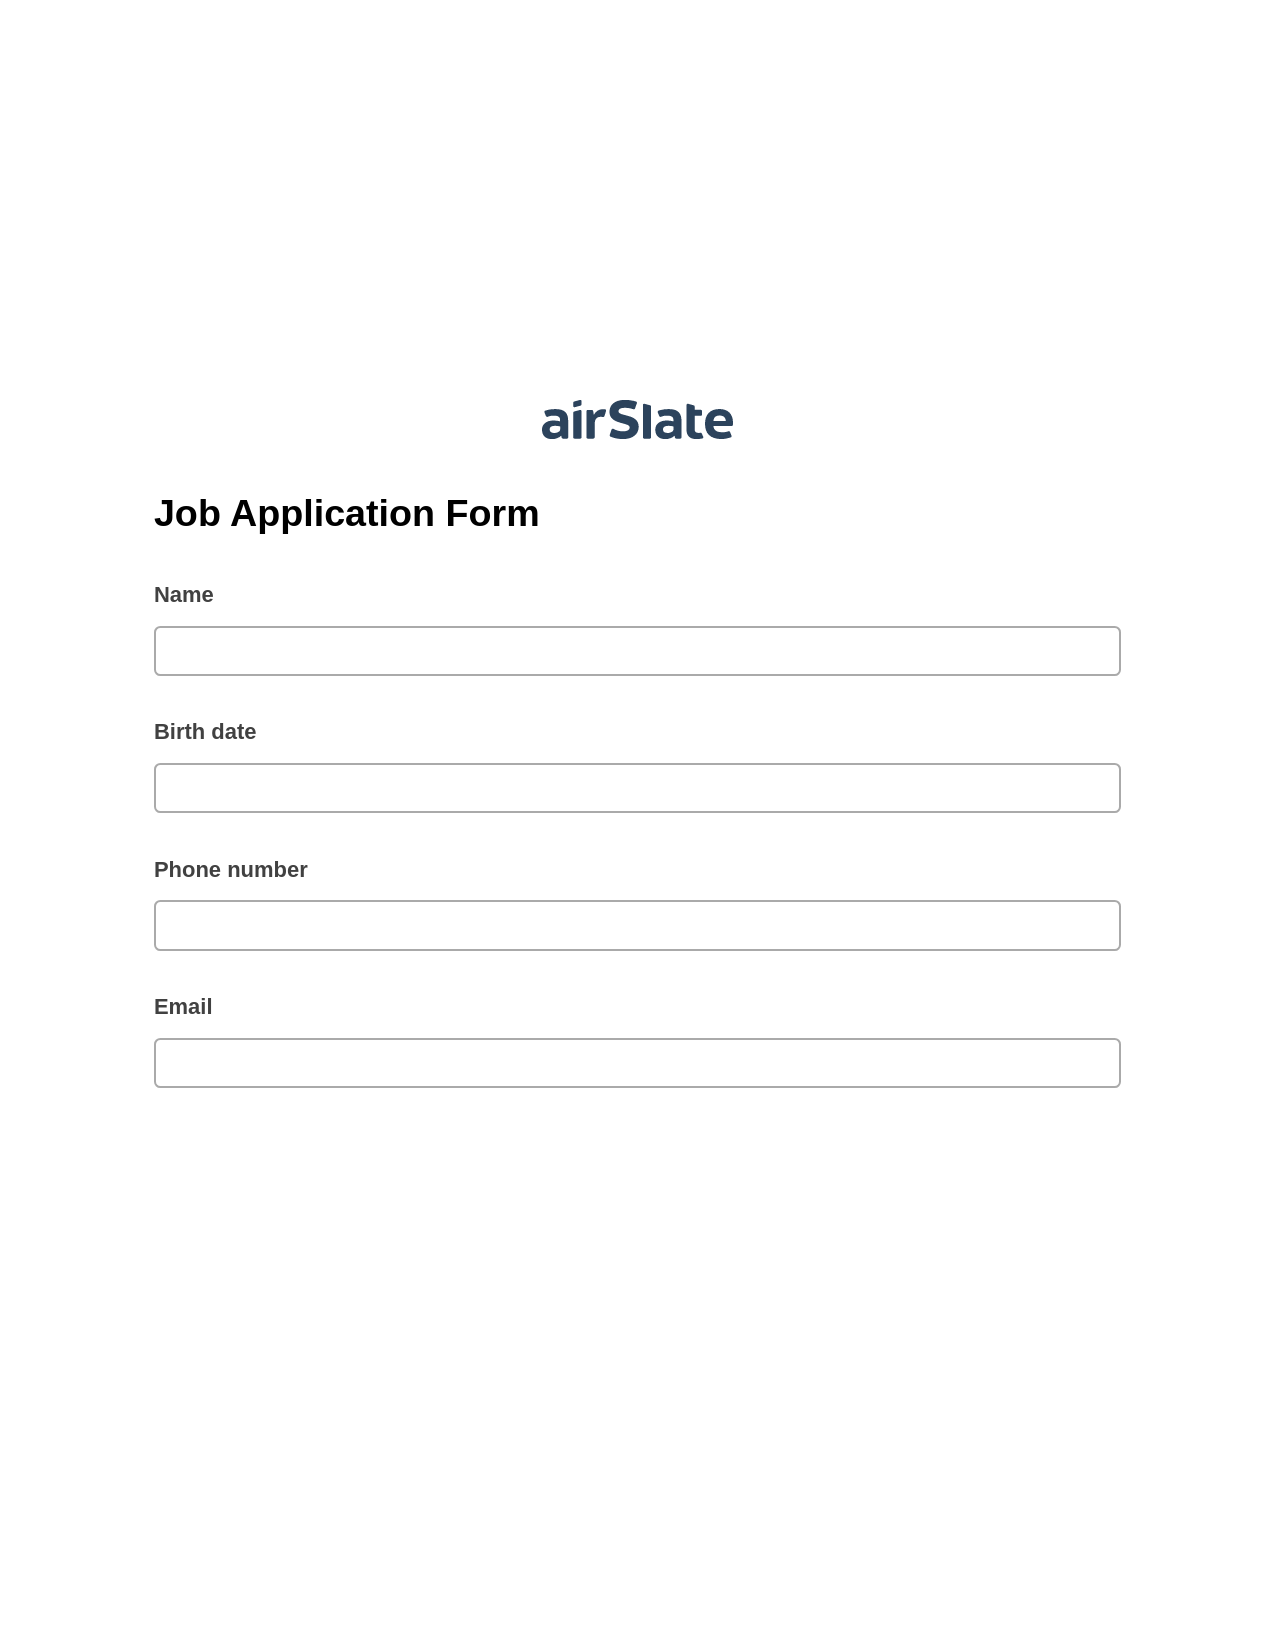 Job Application Form Pre-fill from Google Sheets Bot, Create MS Dynamics 365 Records Bot, Archive to SharePoint Folder Bot